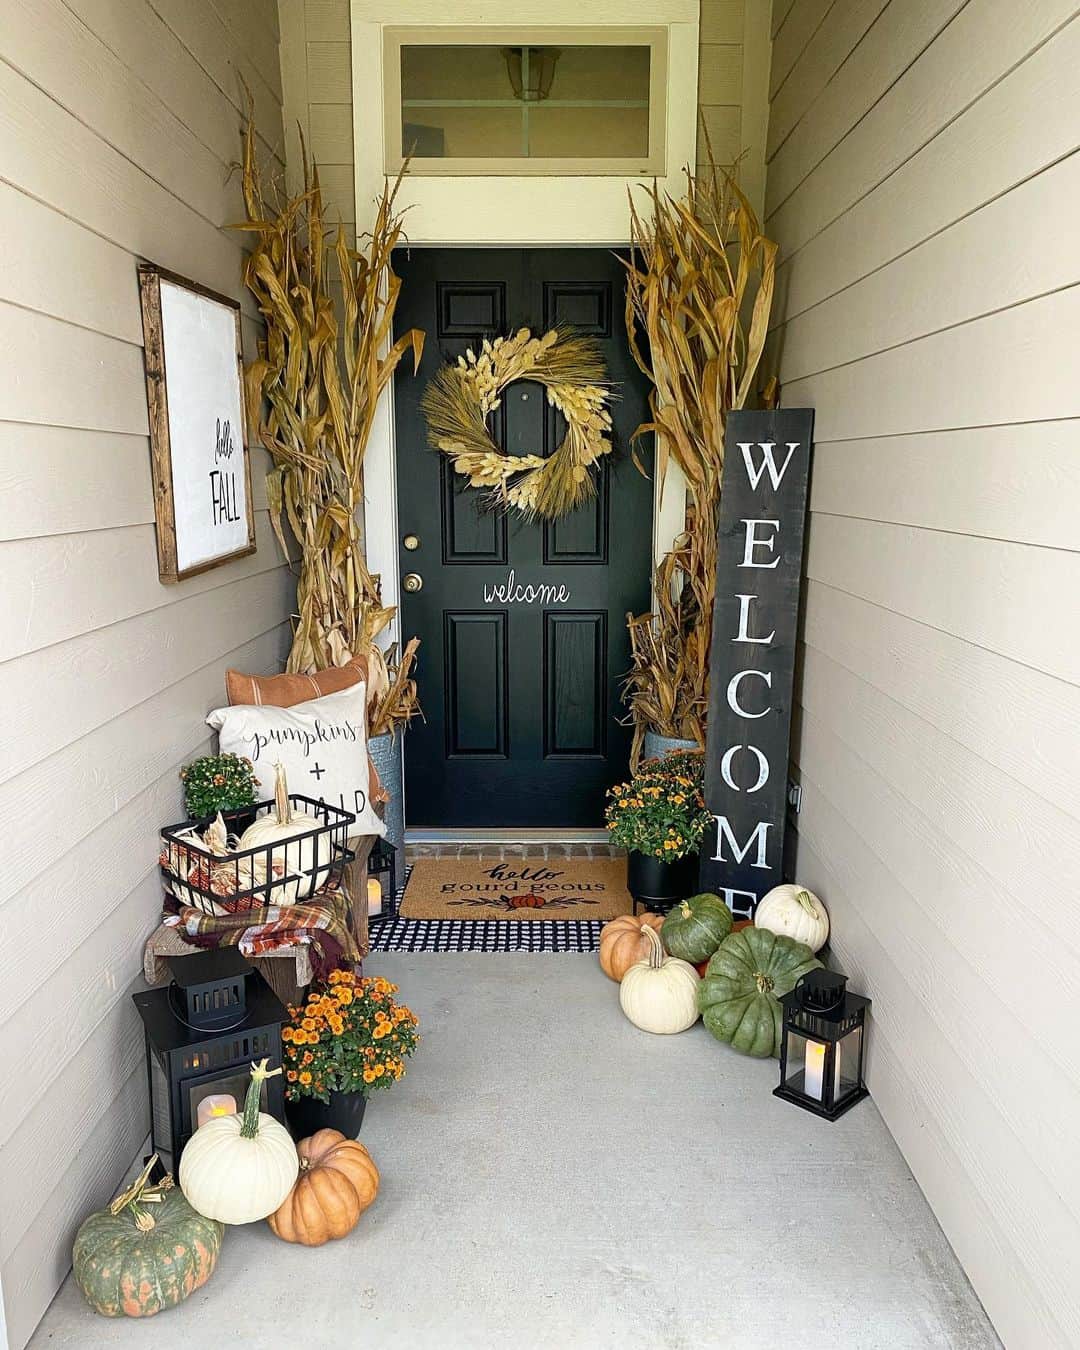 Farmhouse Fall Porch With Welcome Signs - Soul & Lane